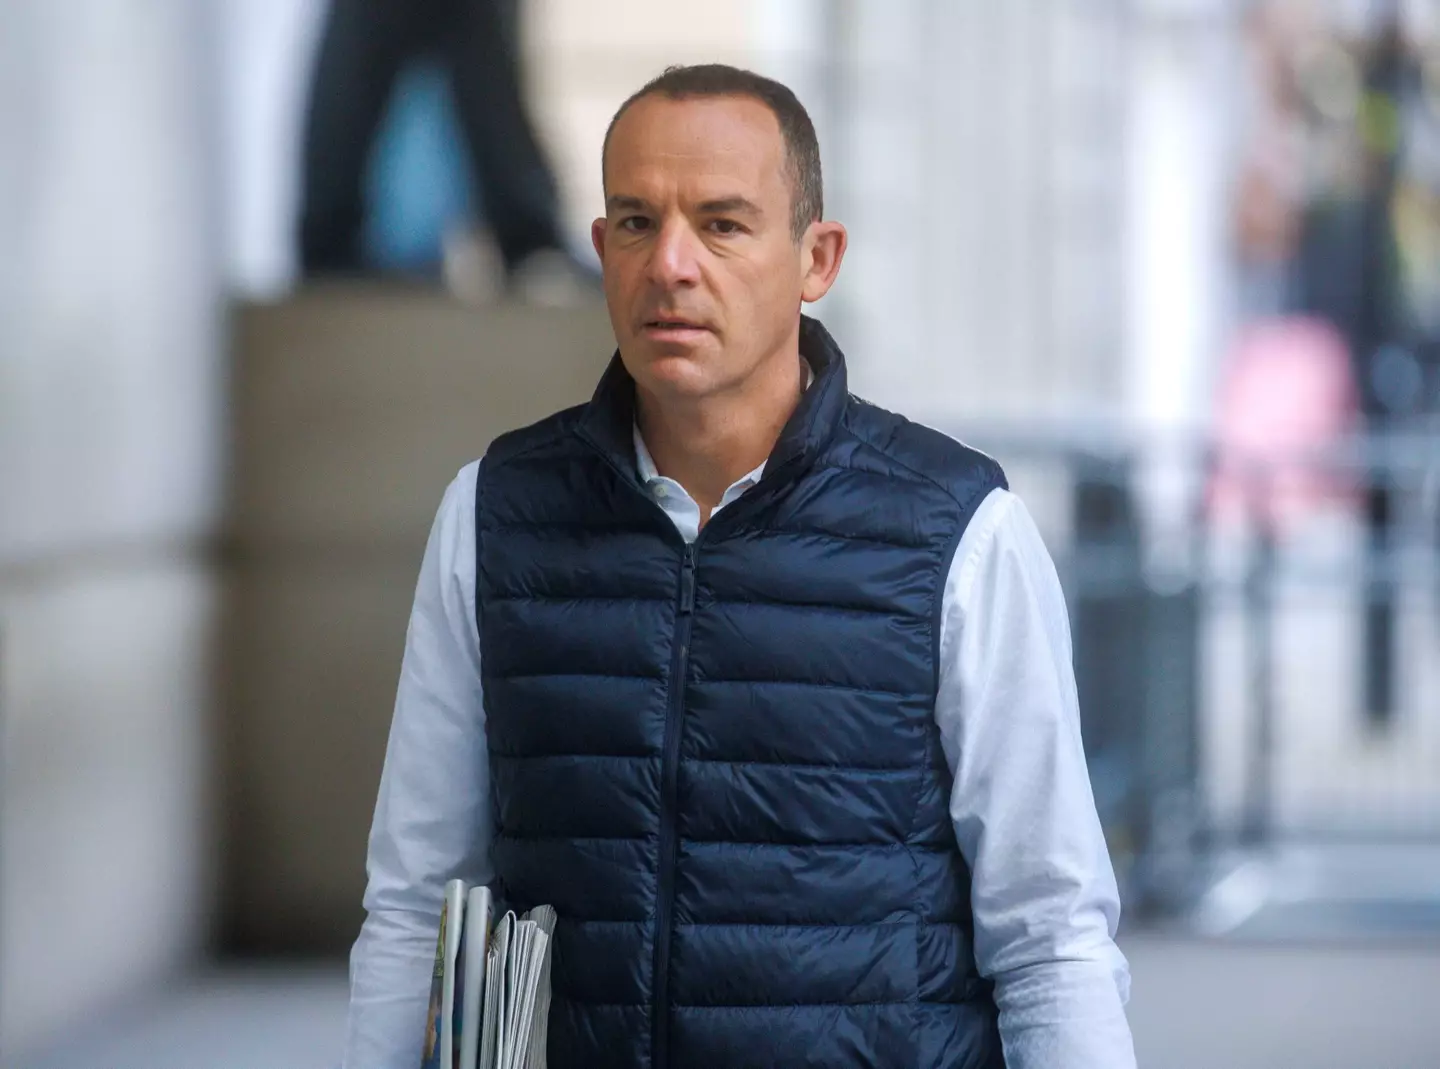 Martin Lewis explained that it's about the insurance making a risk assessment of their customers.